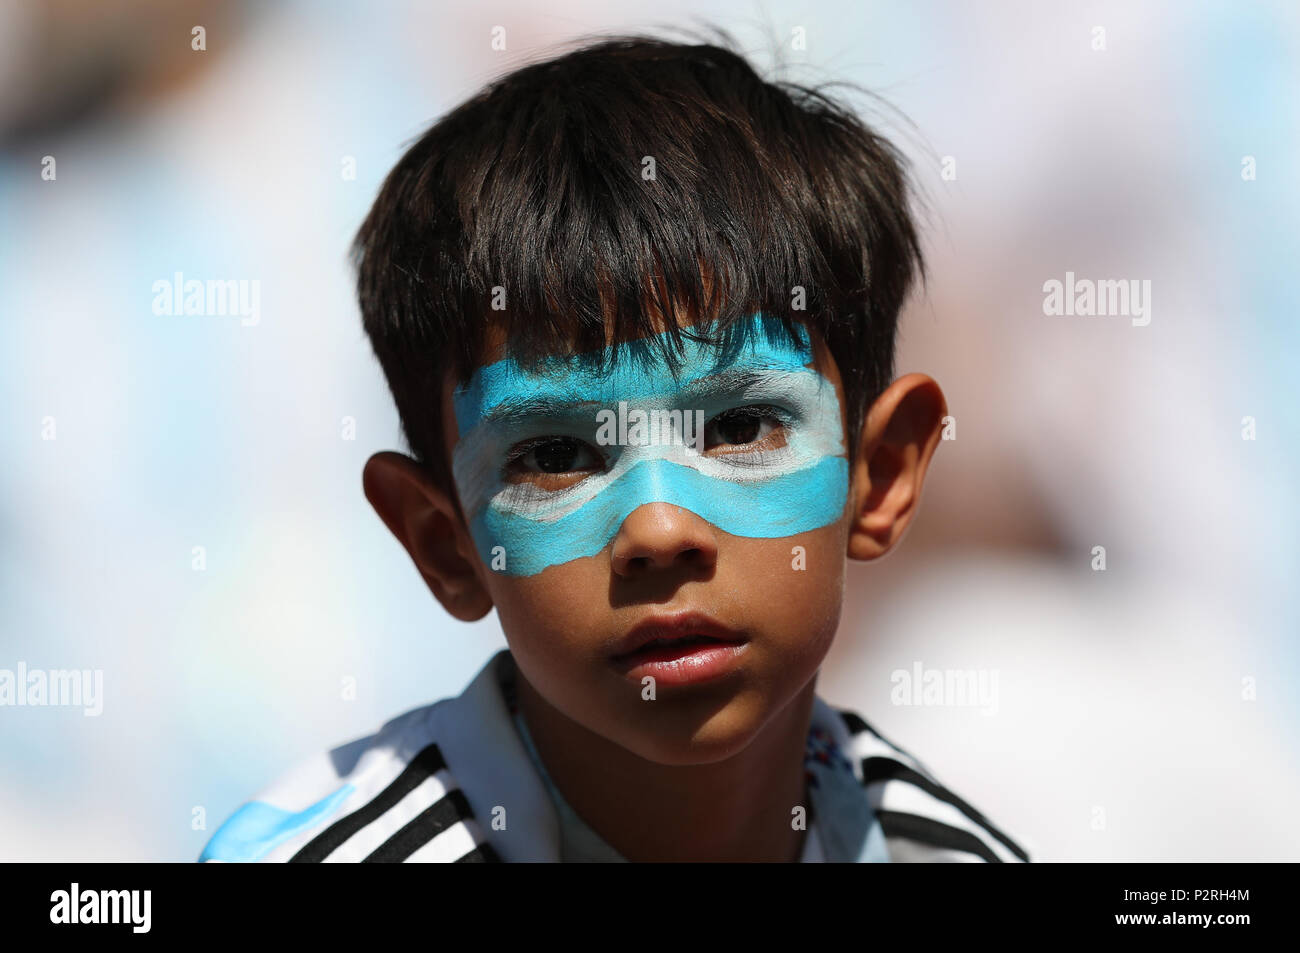 Young Argentina fan ARGENTINA V ICELAND ARGENTINA V ICELAND, 2018 FIFA WORLD CUP RUSSIA 16 June 2018 GBC8159 2018 FIFA World Cup Russia Spartak Stadium Moscow STRICTLY EDITORIAL USE ONLY. If The Player/Players Depicted In This Image Is/Are Playing For An English Club Or The England National Team. Then This Image May Only Be Used For Editorial Purposes. No Commercial Use. The Following Usages Are Also Restricted EVEN IF IN AN EDITORIAL CONTEXT: Use in conjuction with, or part of, any unauthorized audio, video, data, fixture lists, club/league logos, Betting, Games or any 'live Stock Photo